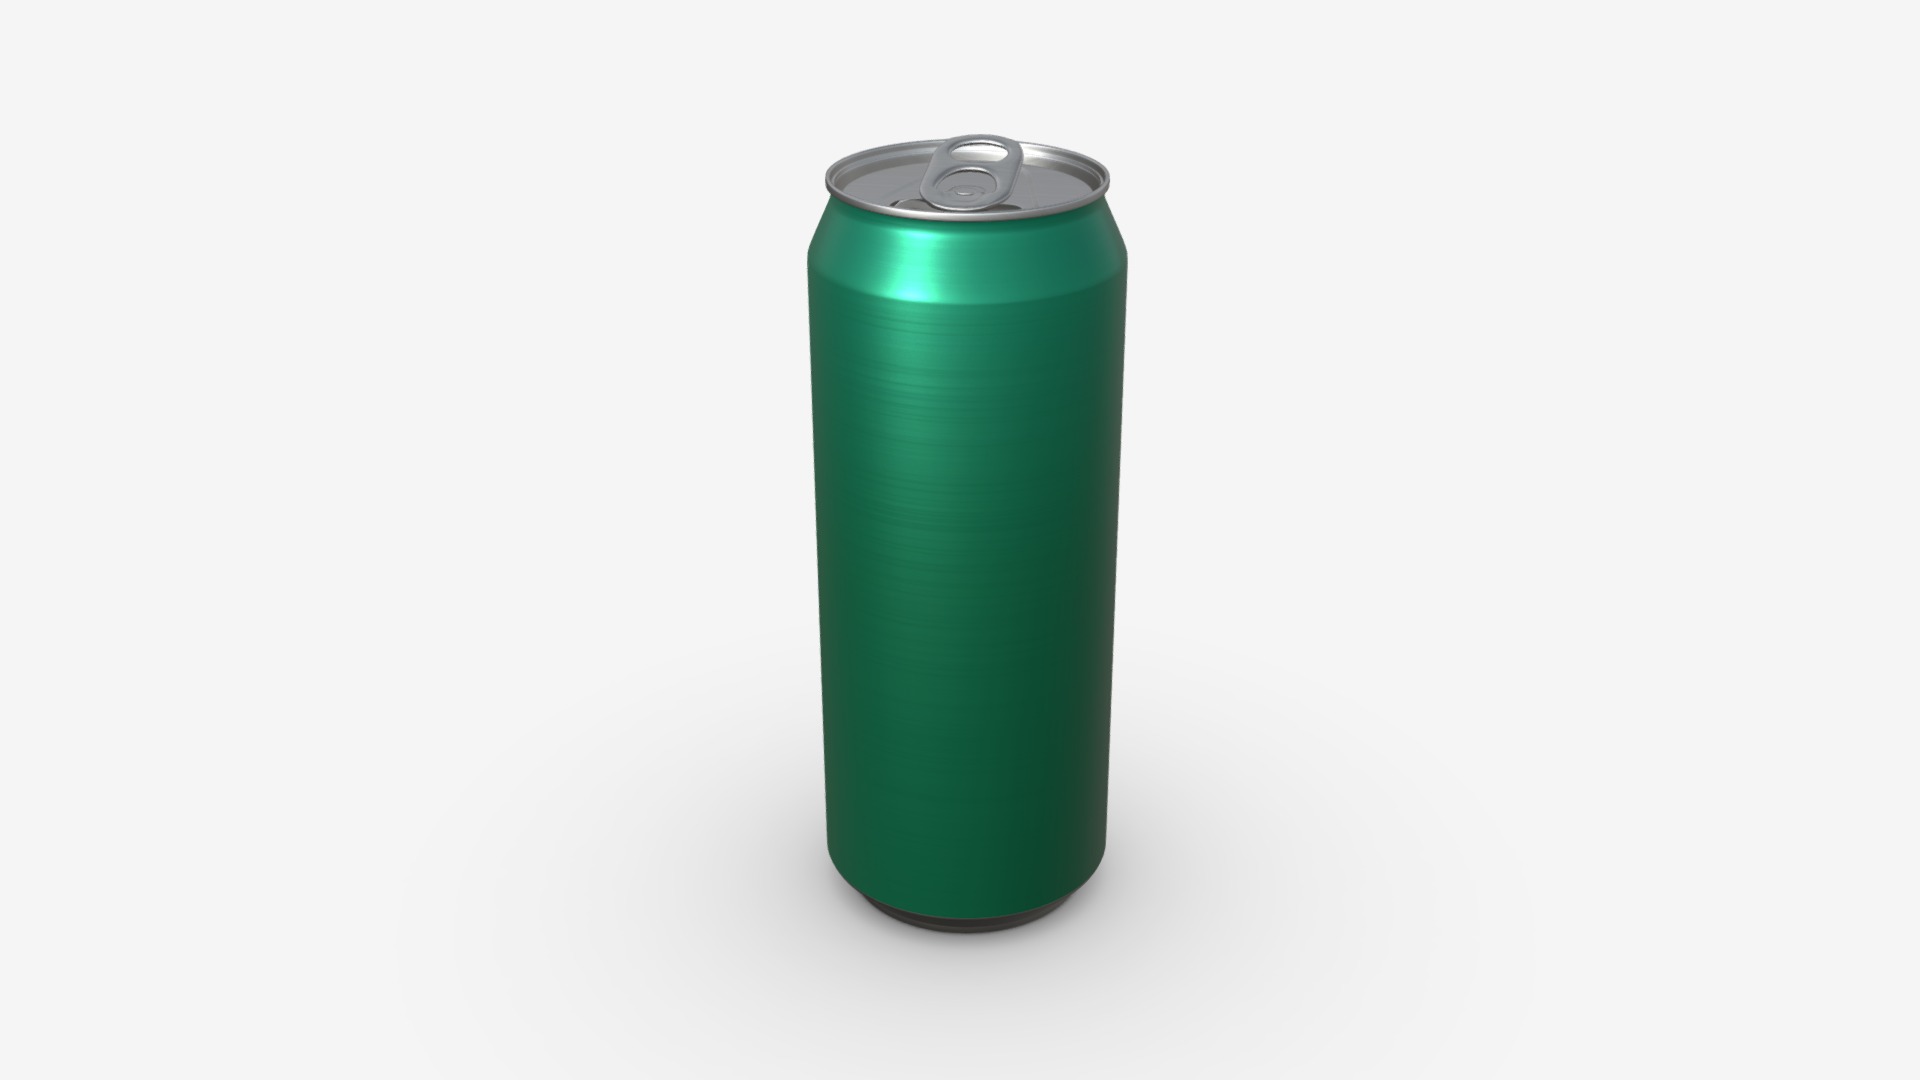 3D model Opened standard beverage can 500ml - This is a 3D model of the Opened standard beverage can 500ml. The 3D model is about a green cylindrical object.